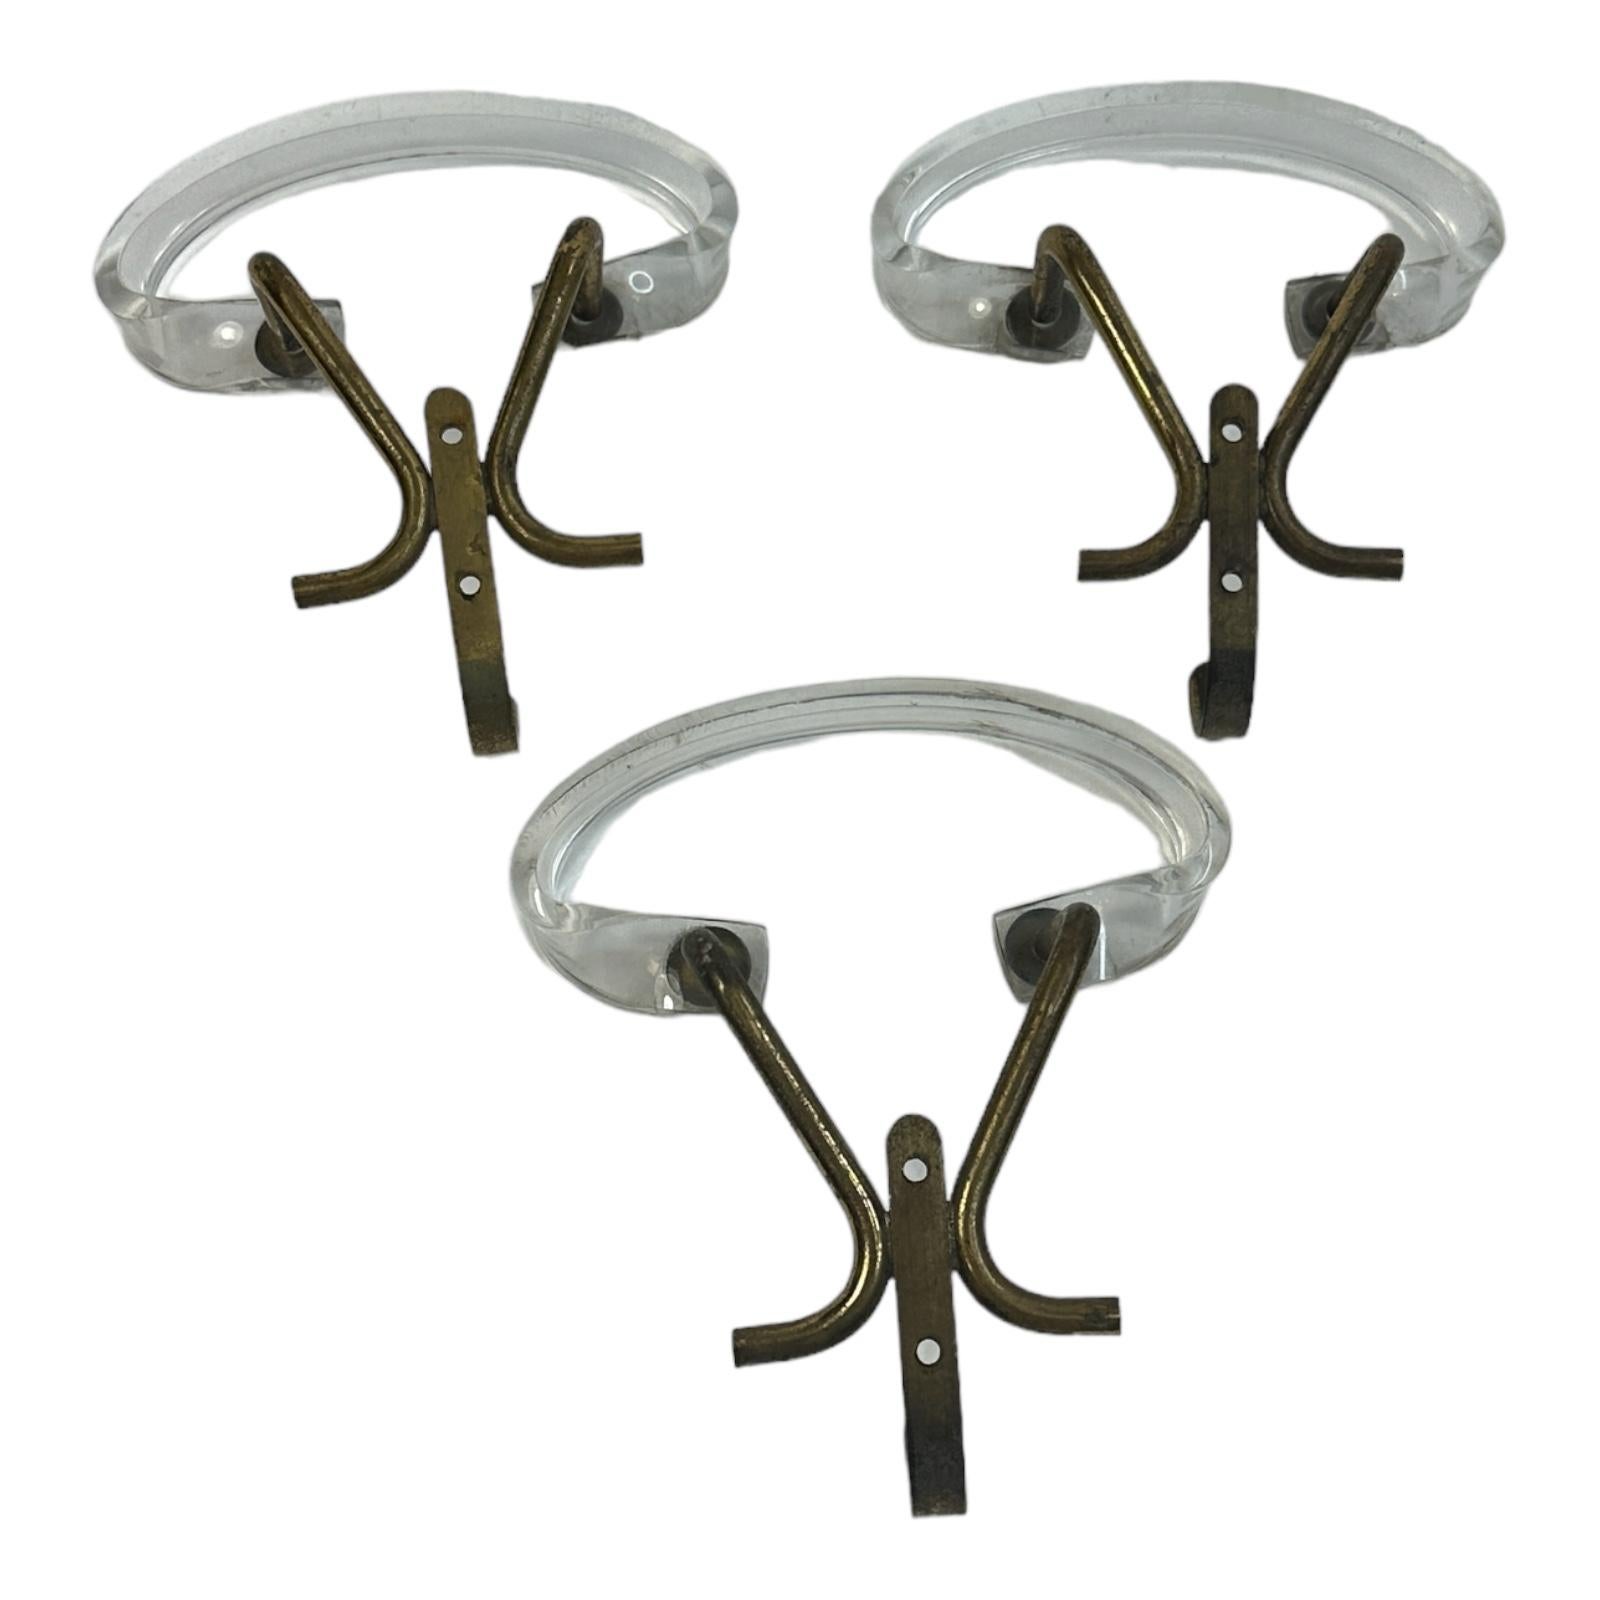 Set of Three Wall Coat Hooks, Lucite and Brass, Mid-Century Modern, 1960s For Sale 1